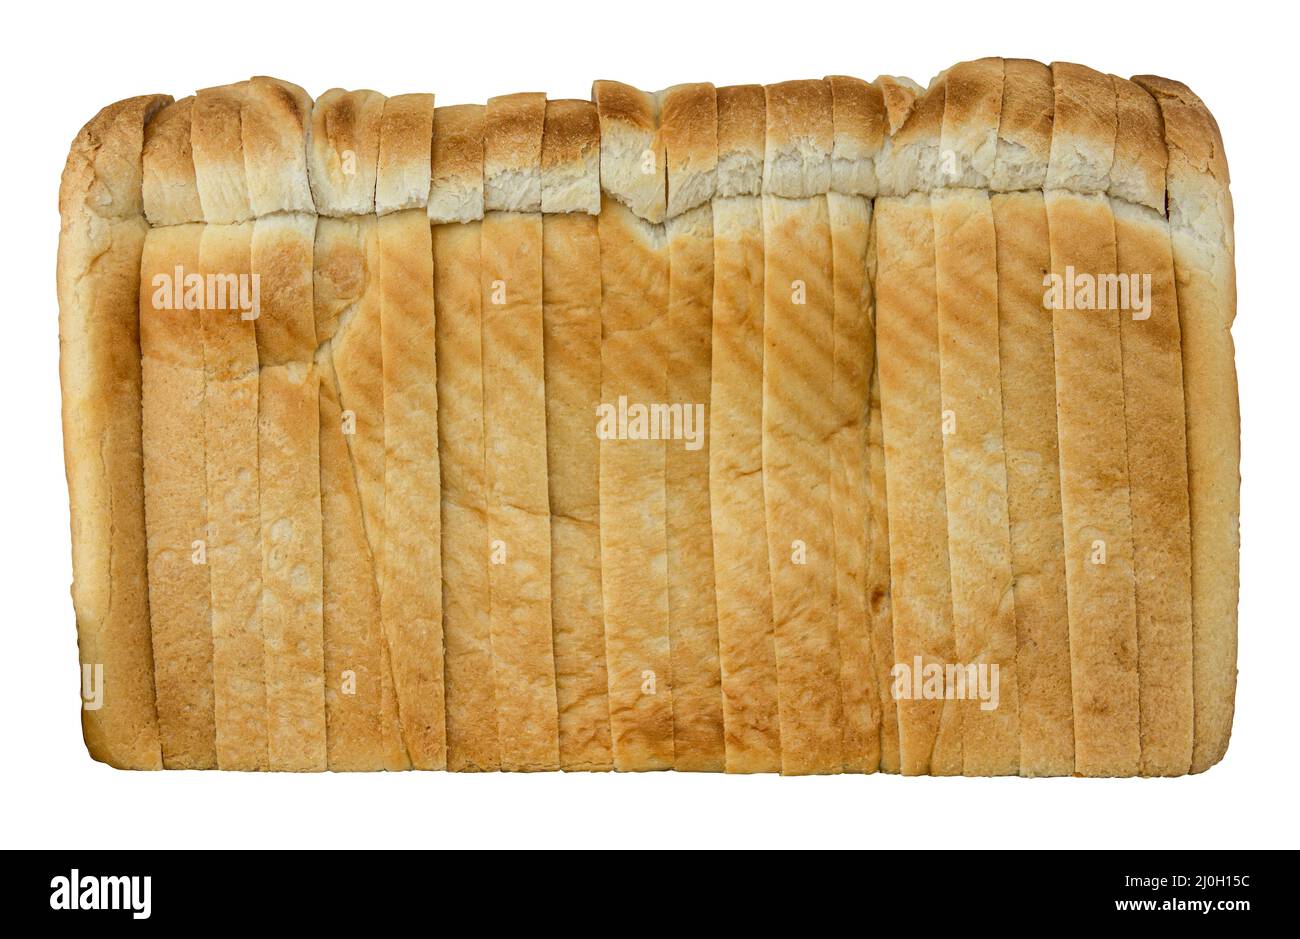 Isolated Loaf Of White Sliced Bread Stock Photo